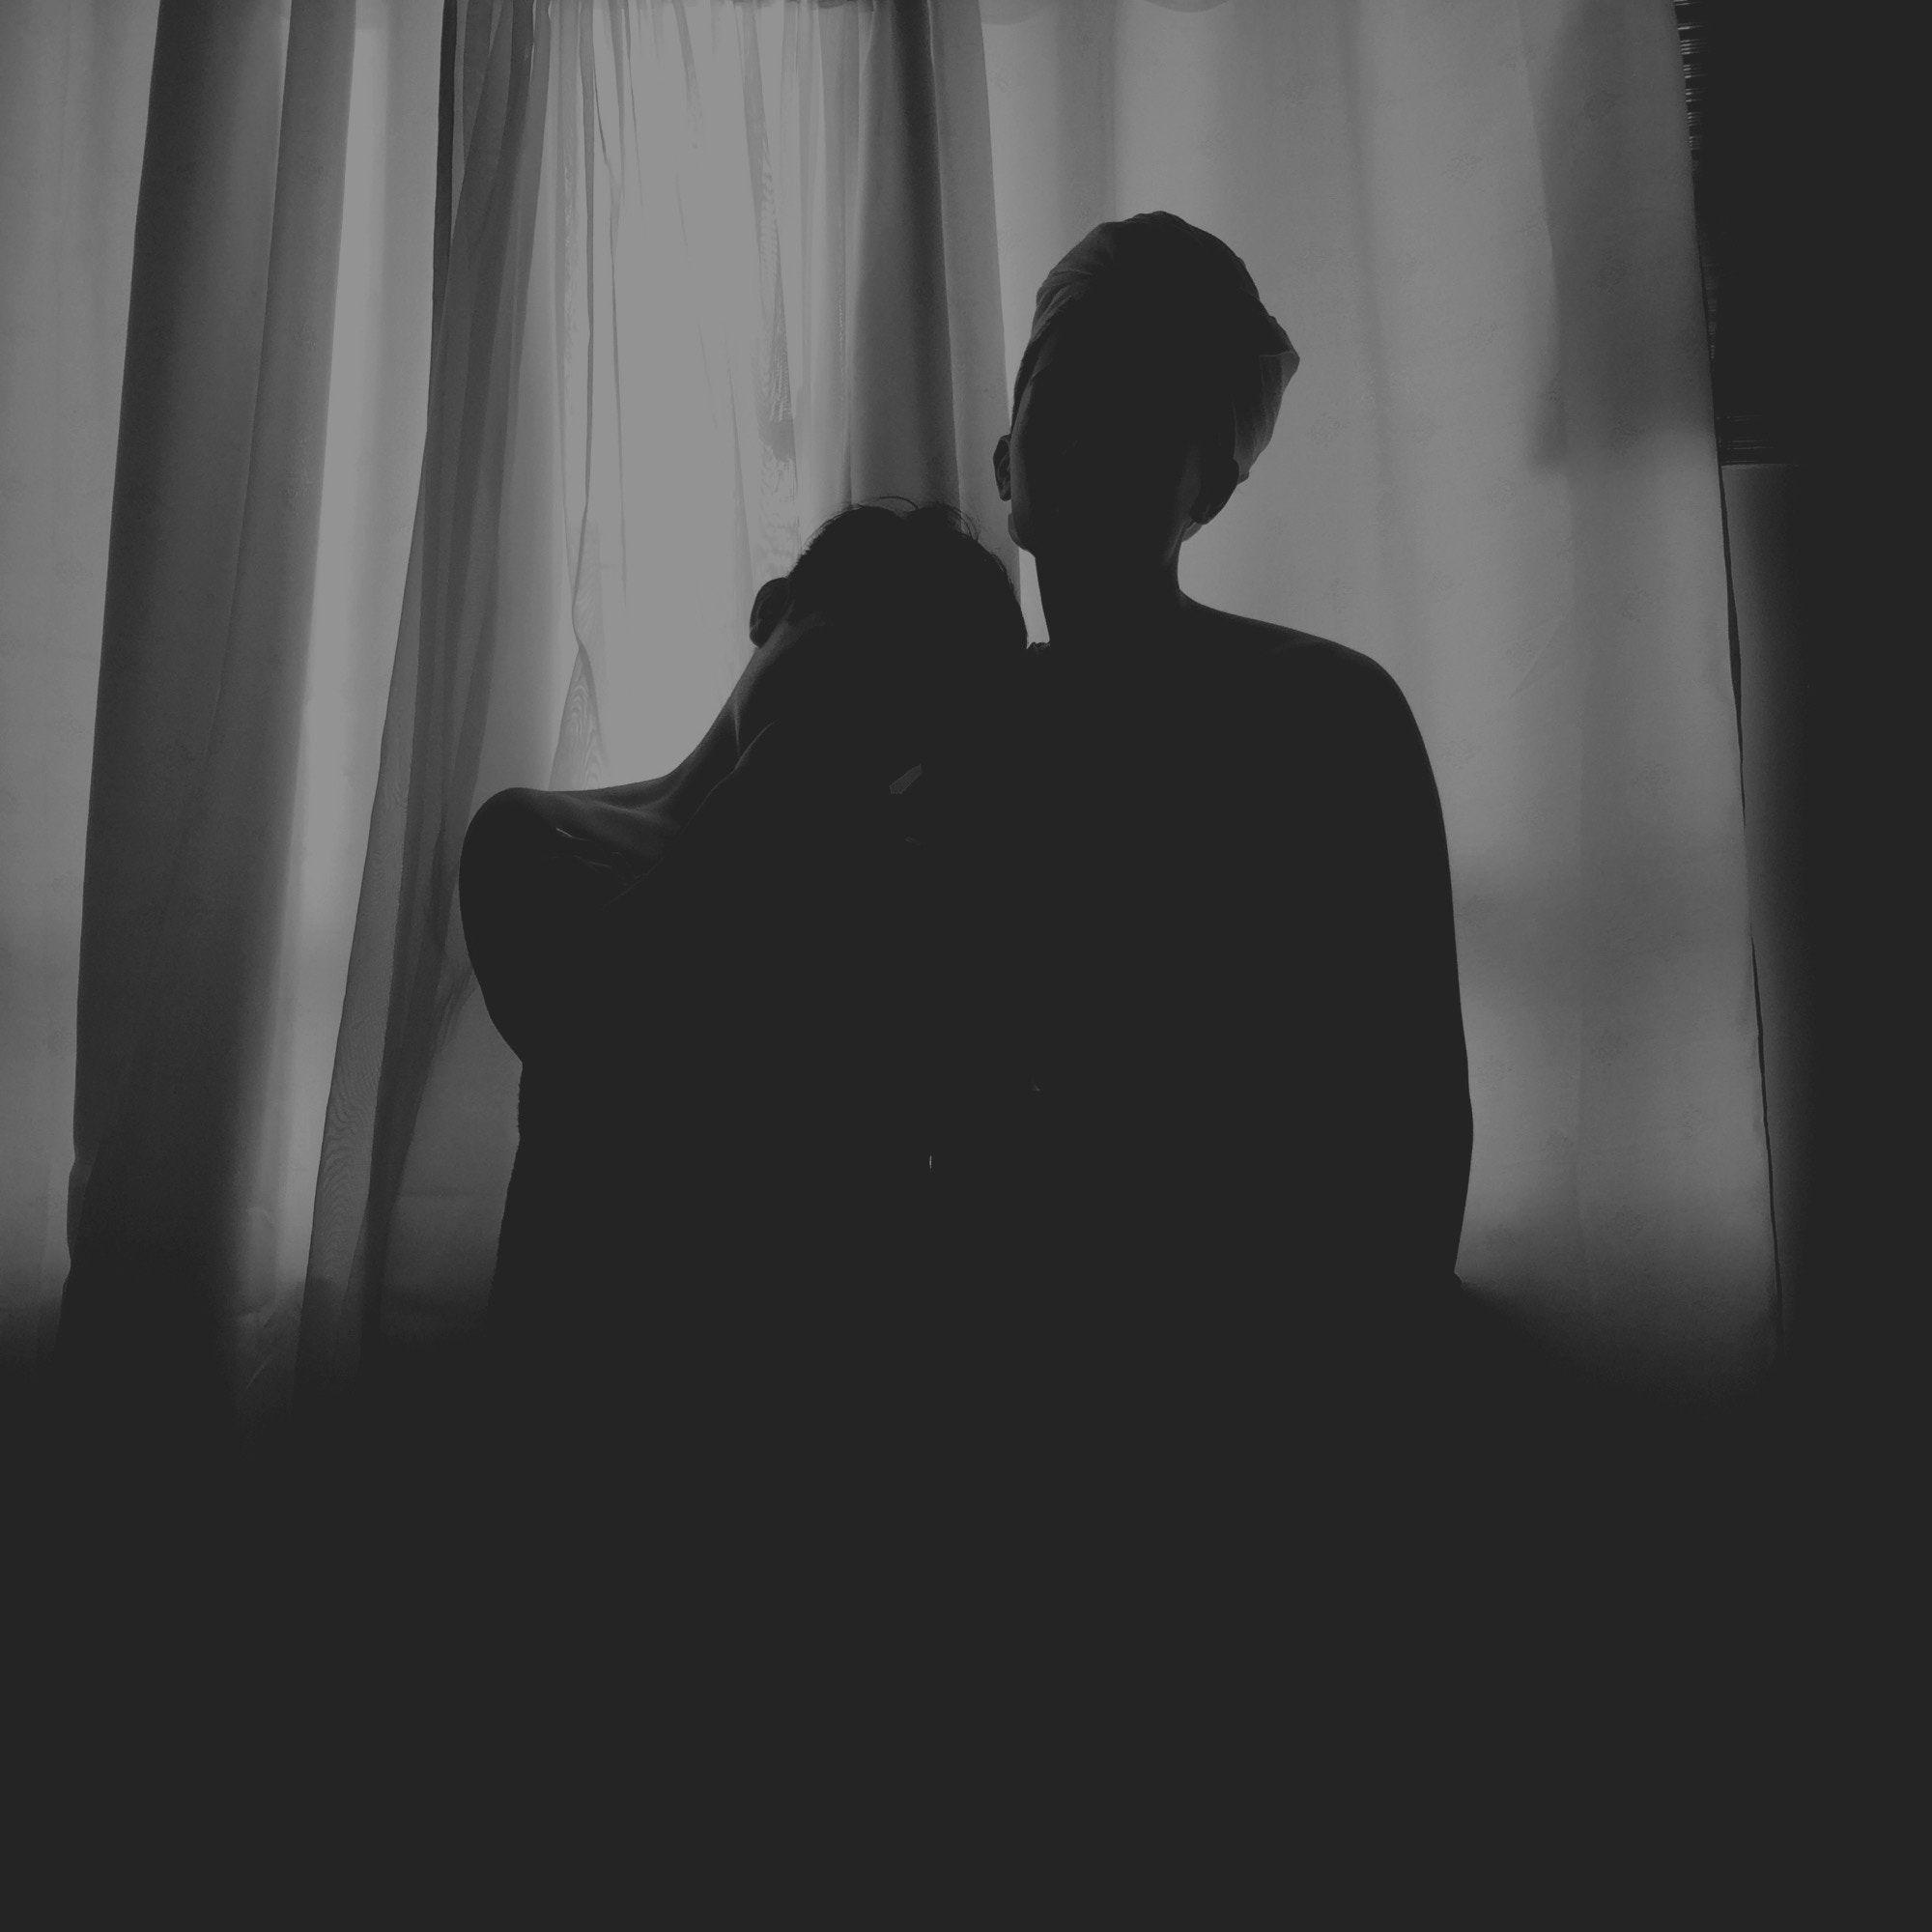 2000x2000 #couple, #wallpaper, #people background, #love, #lgbtqium, #silhouette, #dark, #curtain, #Creative Commons image, #darkness, #gay, #people, #contrast, #light, #bw, #people wallpaper, #lovewin, #shadow, #blackandwhite, #people